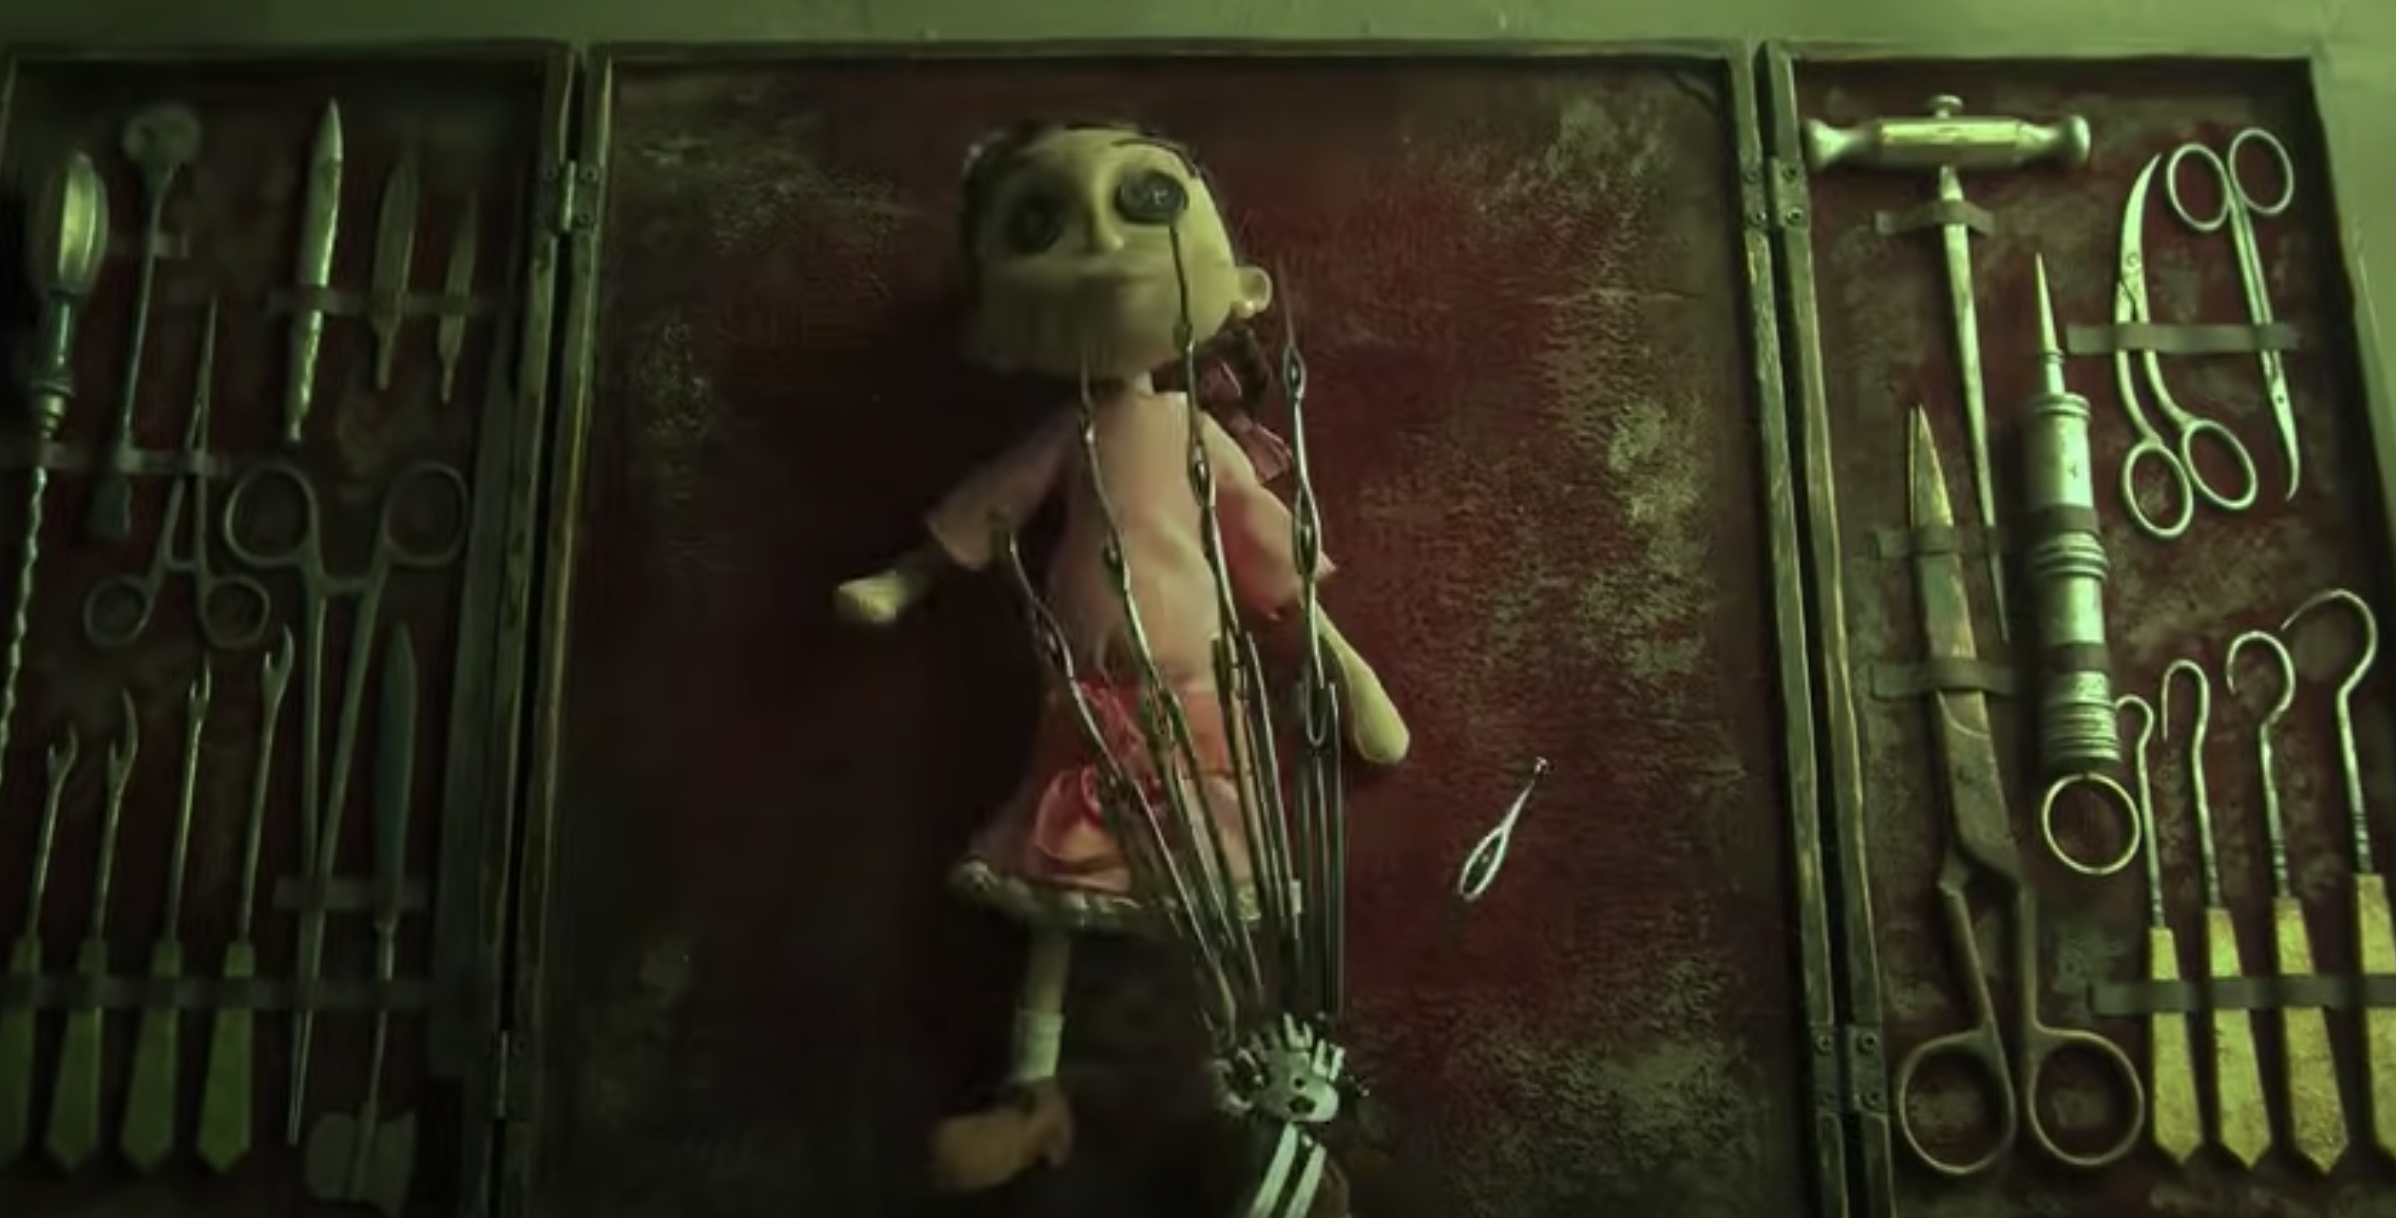 A metal hand hovers over a doll with button eyes